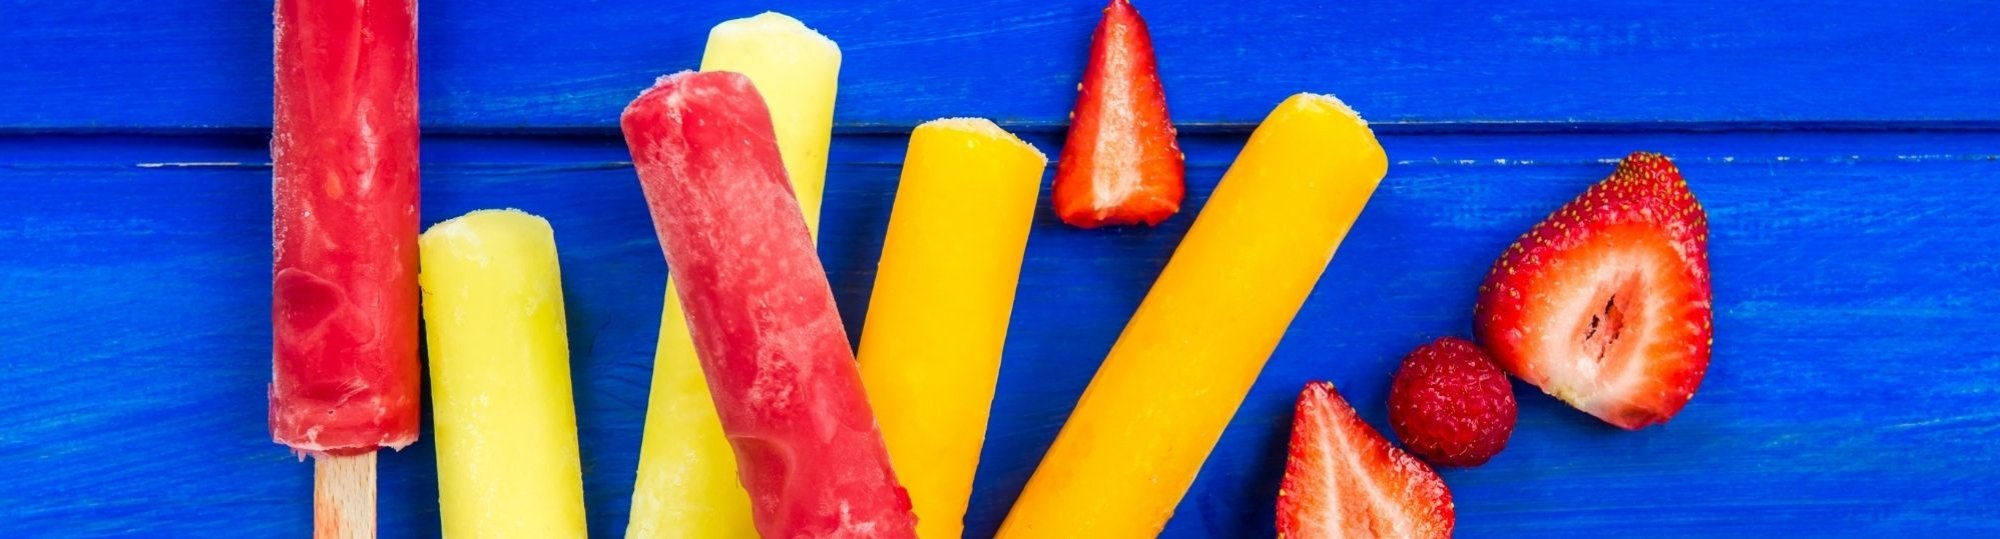 Delicious iced lolly recipes to keep you hydrated!